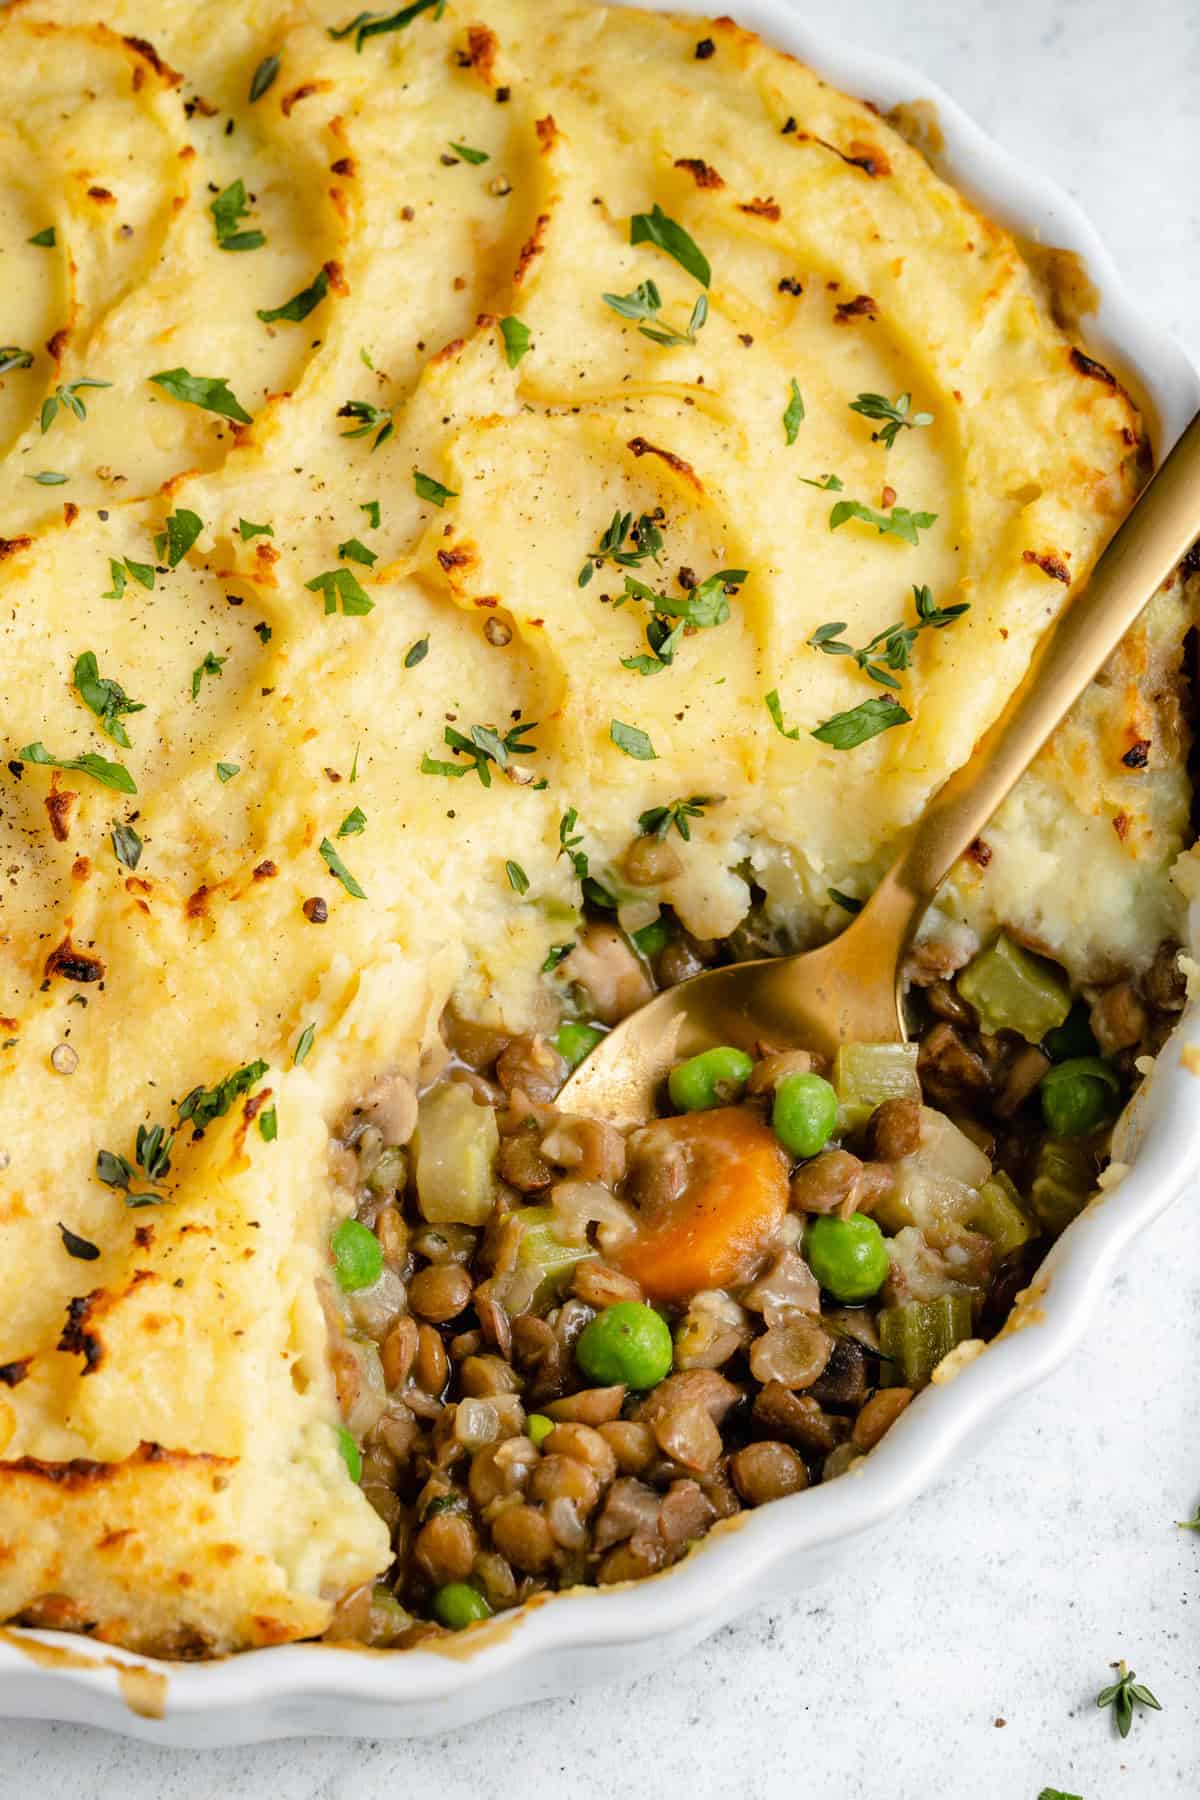 Shepherd's Pie in serving dish with a portion removed to show filling